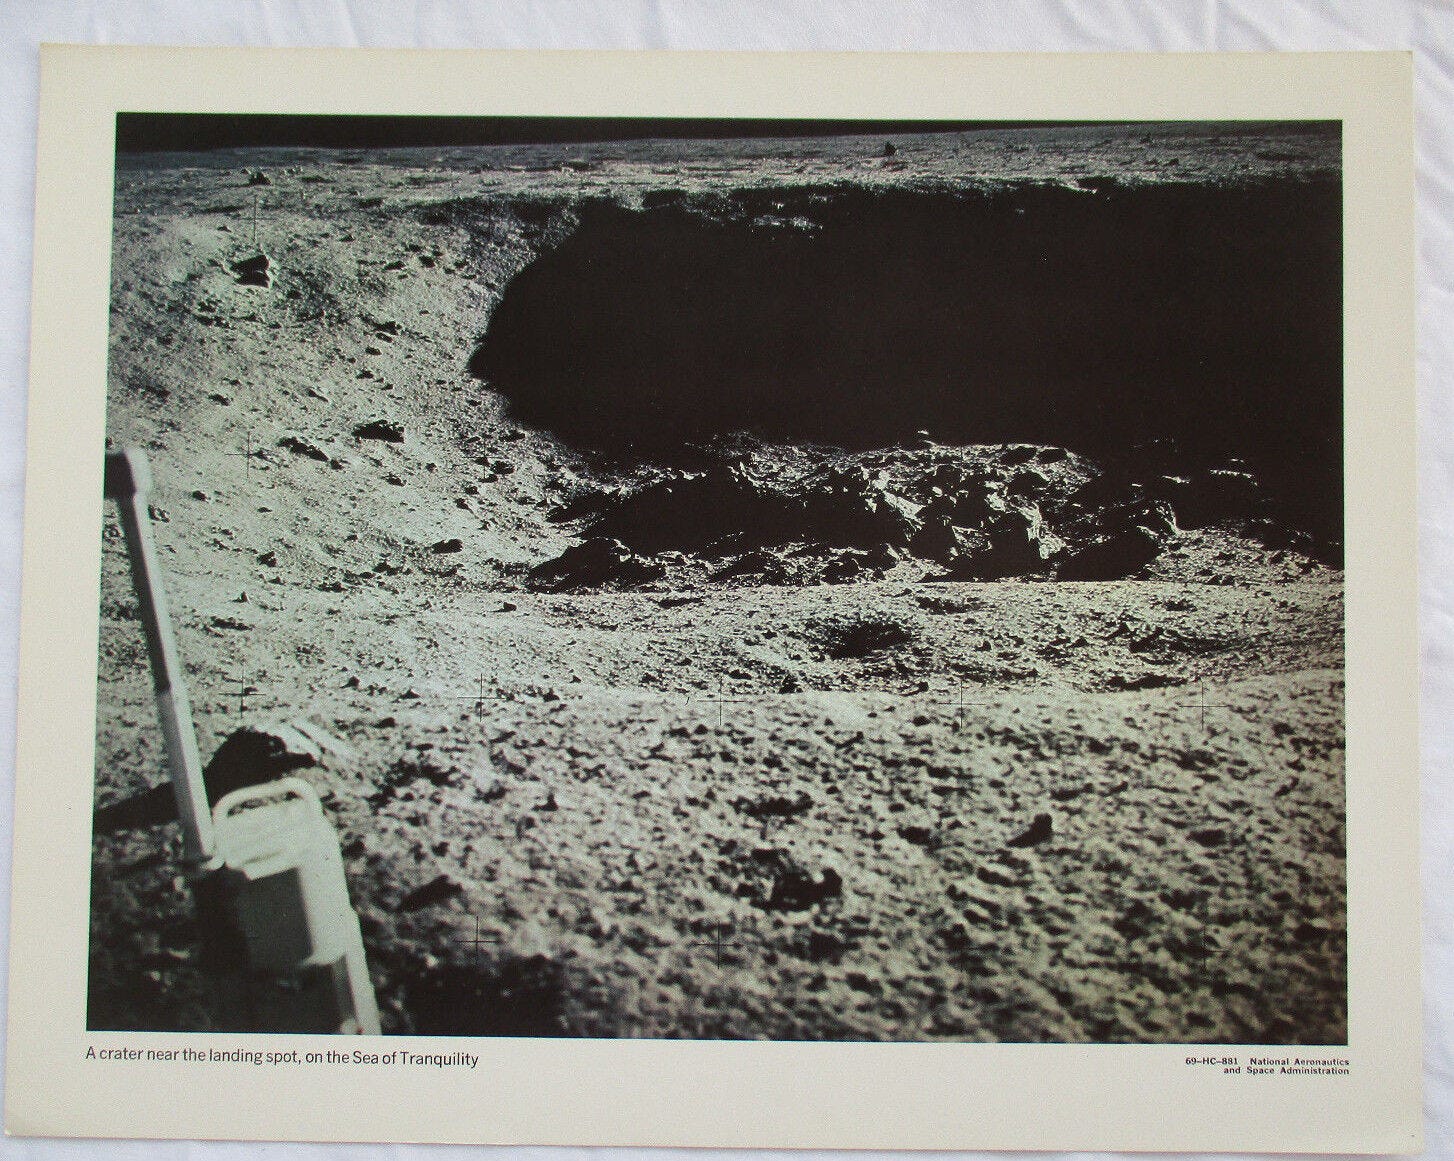 VINTAGE NASA PHOTO PRINT - SEA OF TRANQUILITY CRATER 69-HC-881 - Picture 1 of 3